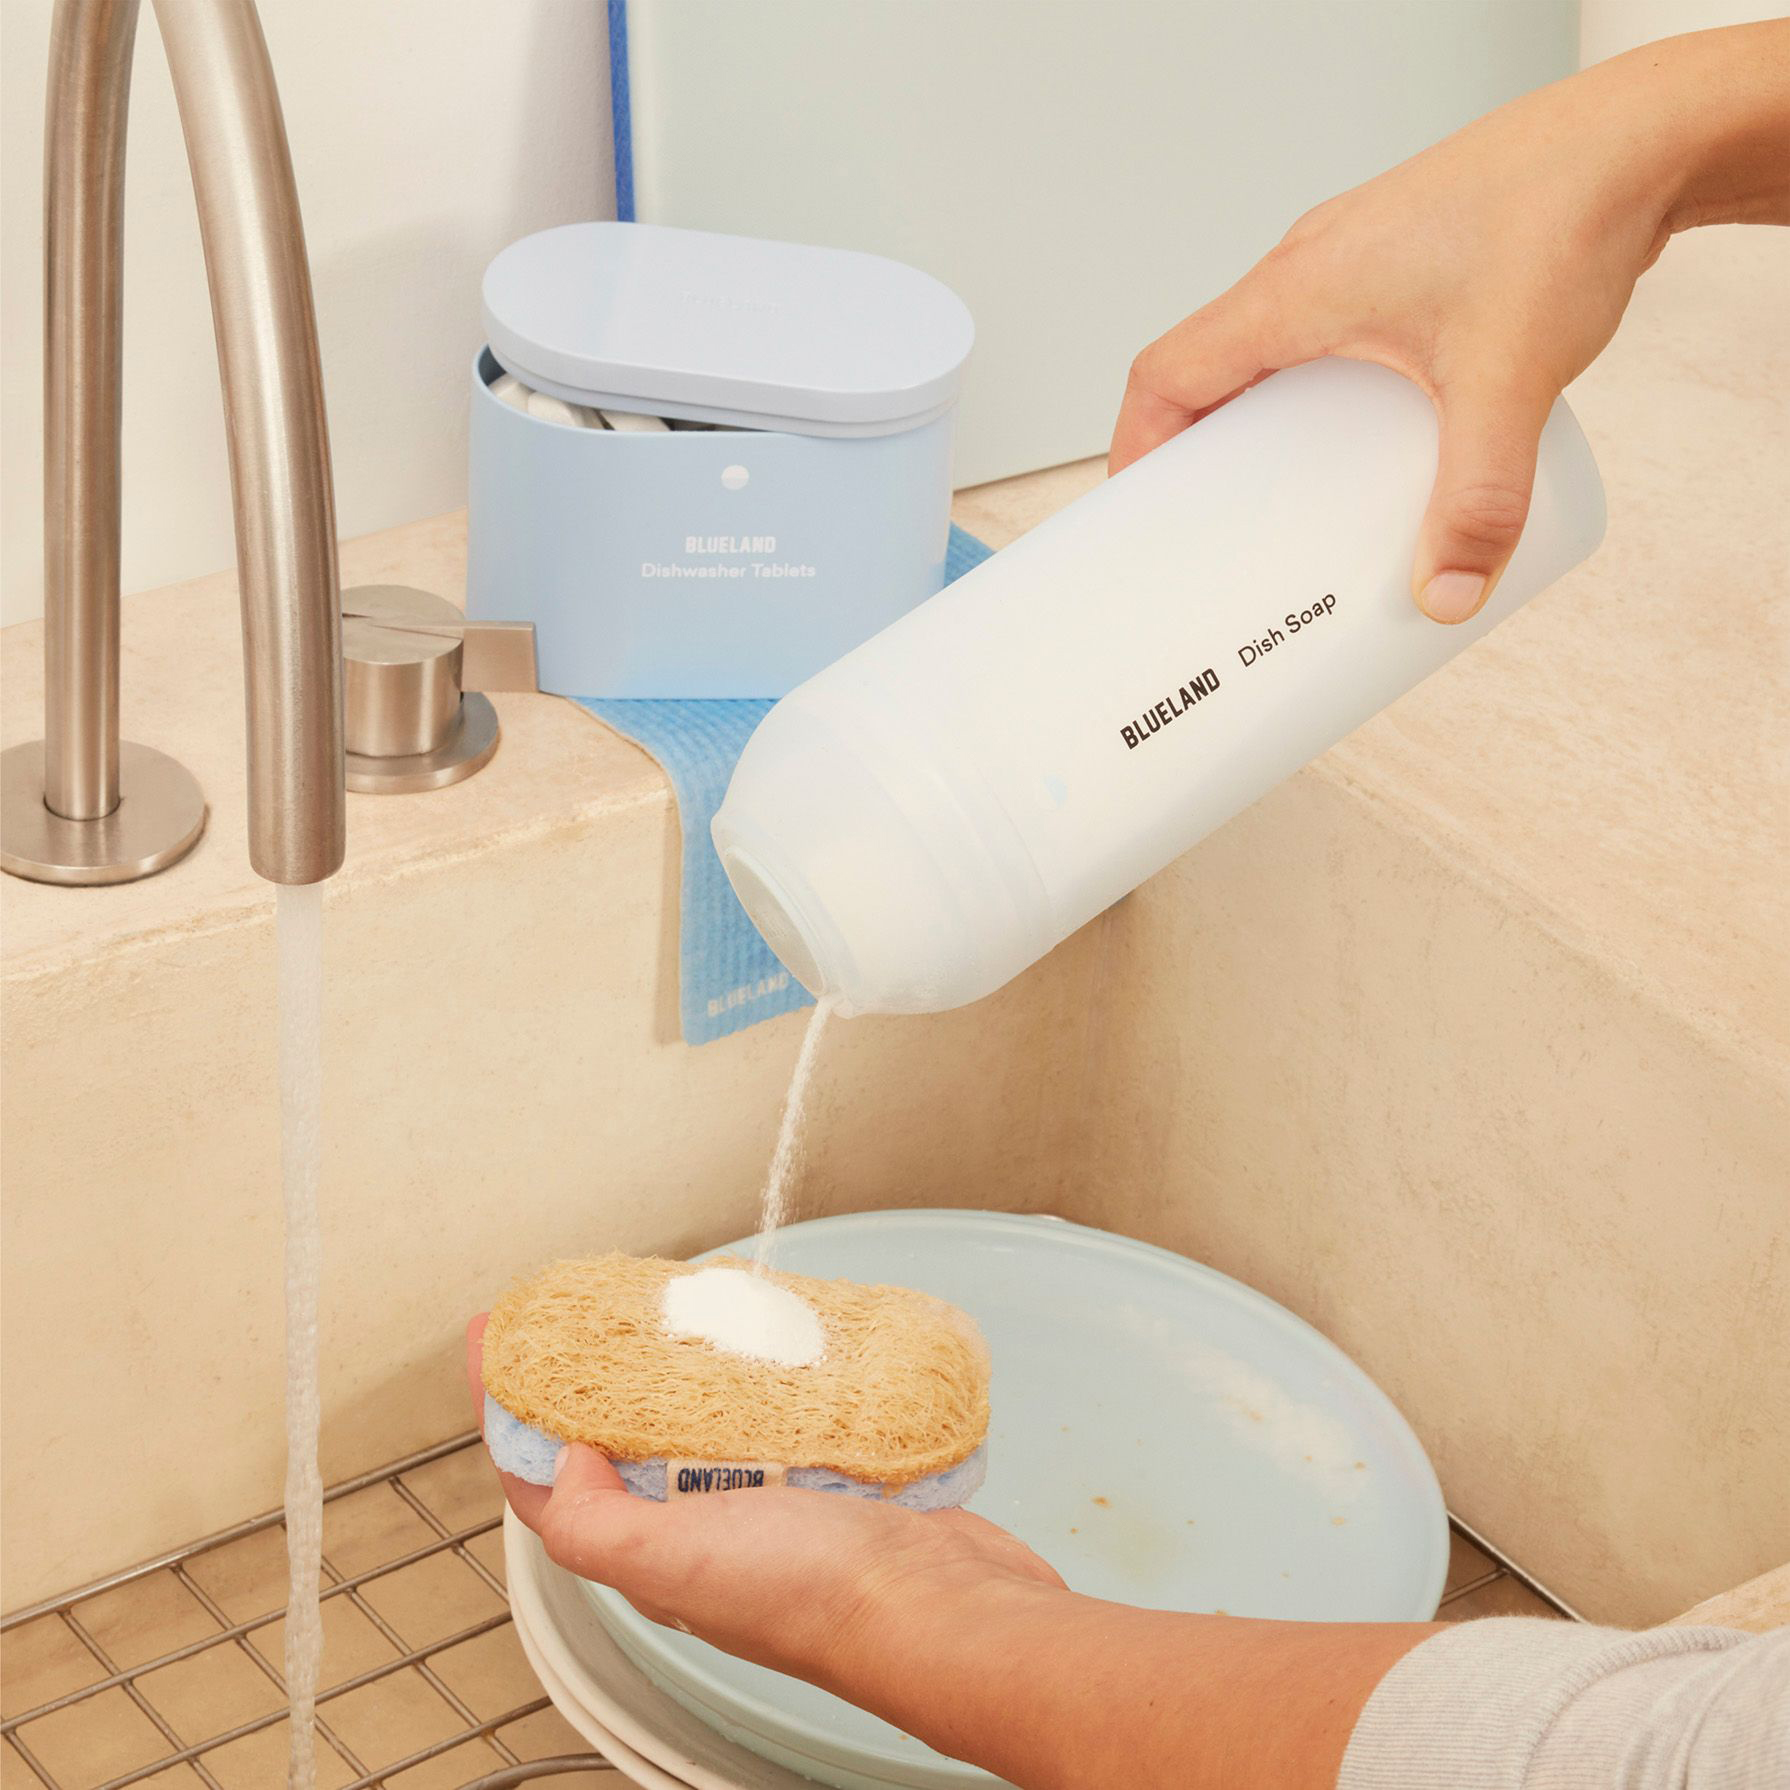 A refillable white bottle of blue land dish powder pouring onto a sponge that is washing a plate over a sink